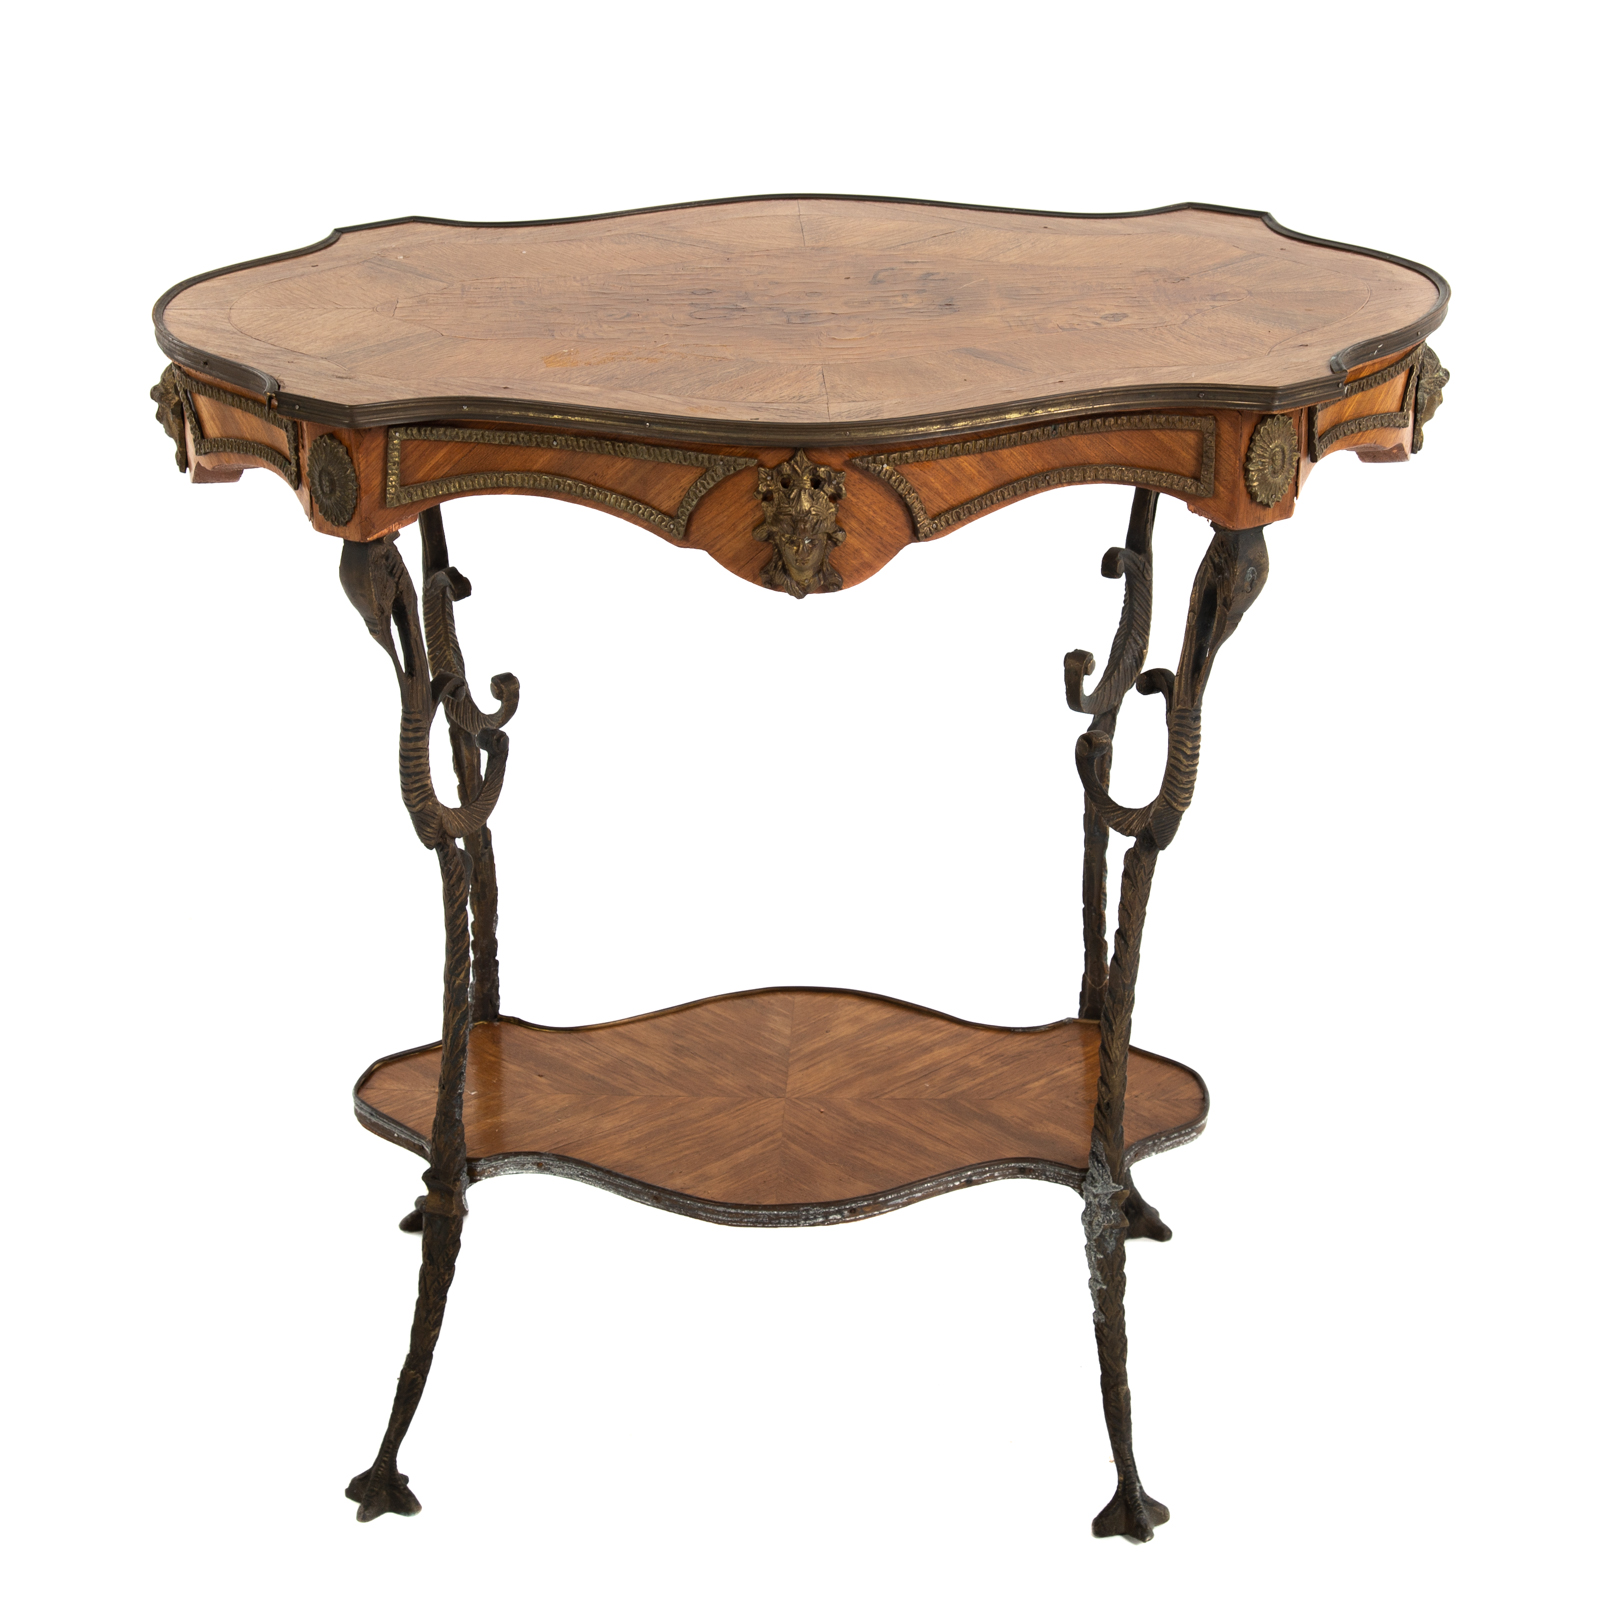 FRENCH GILT MOUNTED TABLE 20th